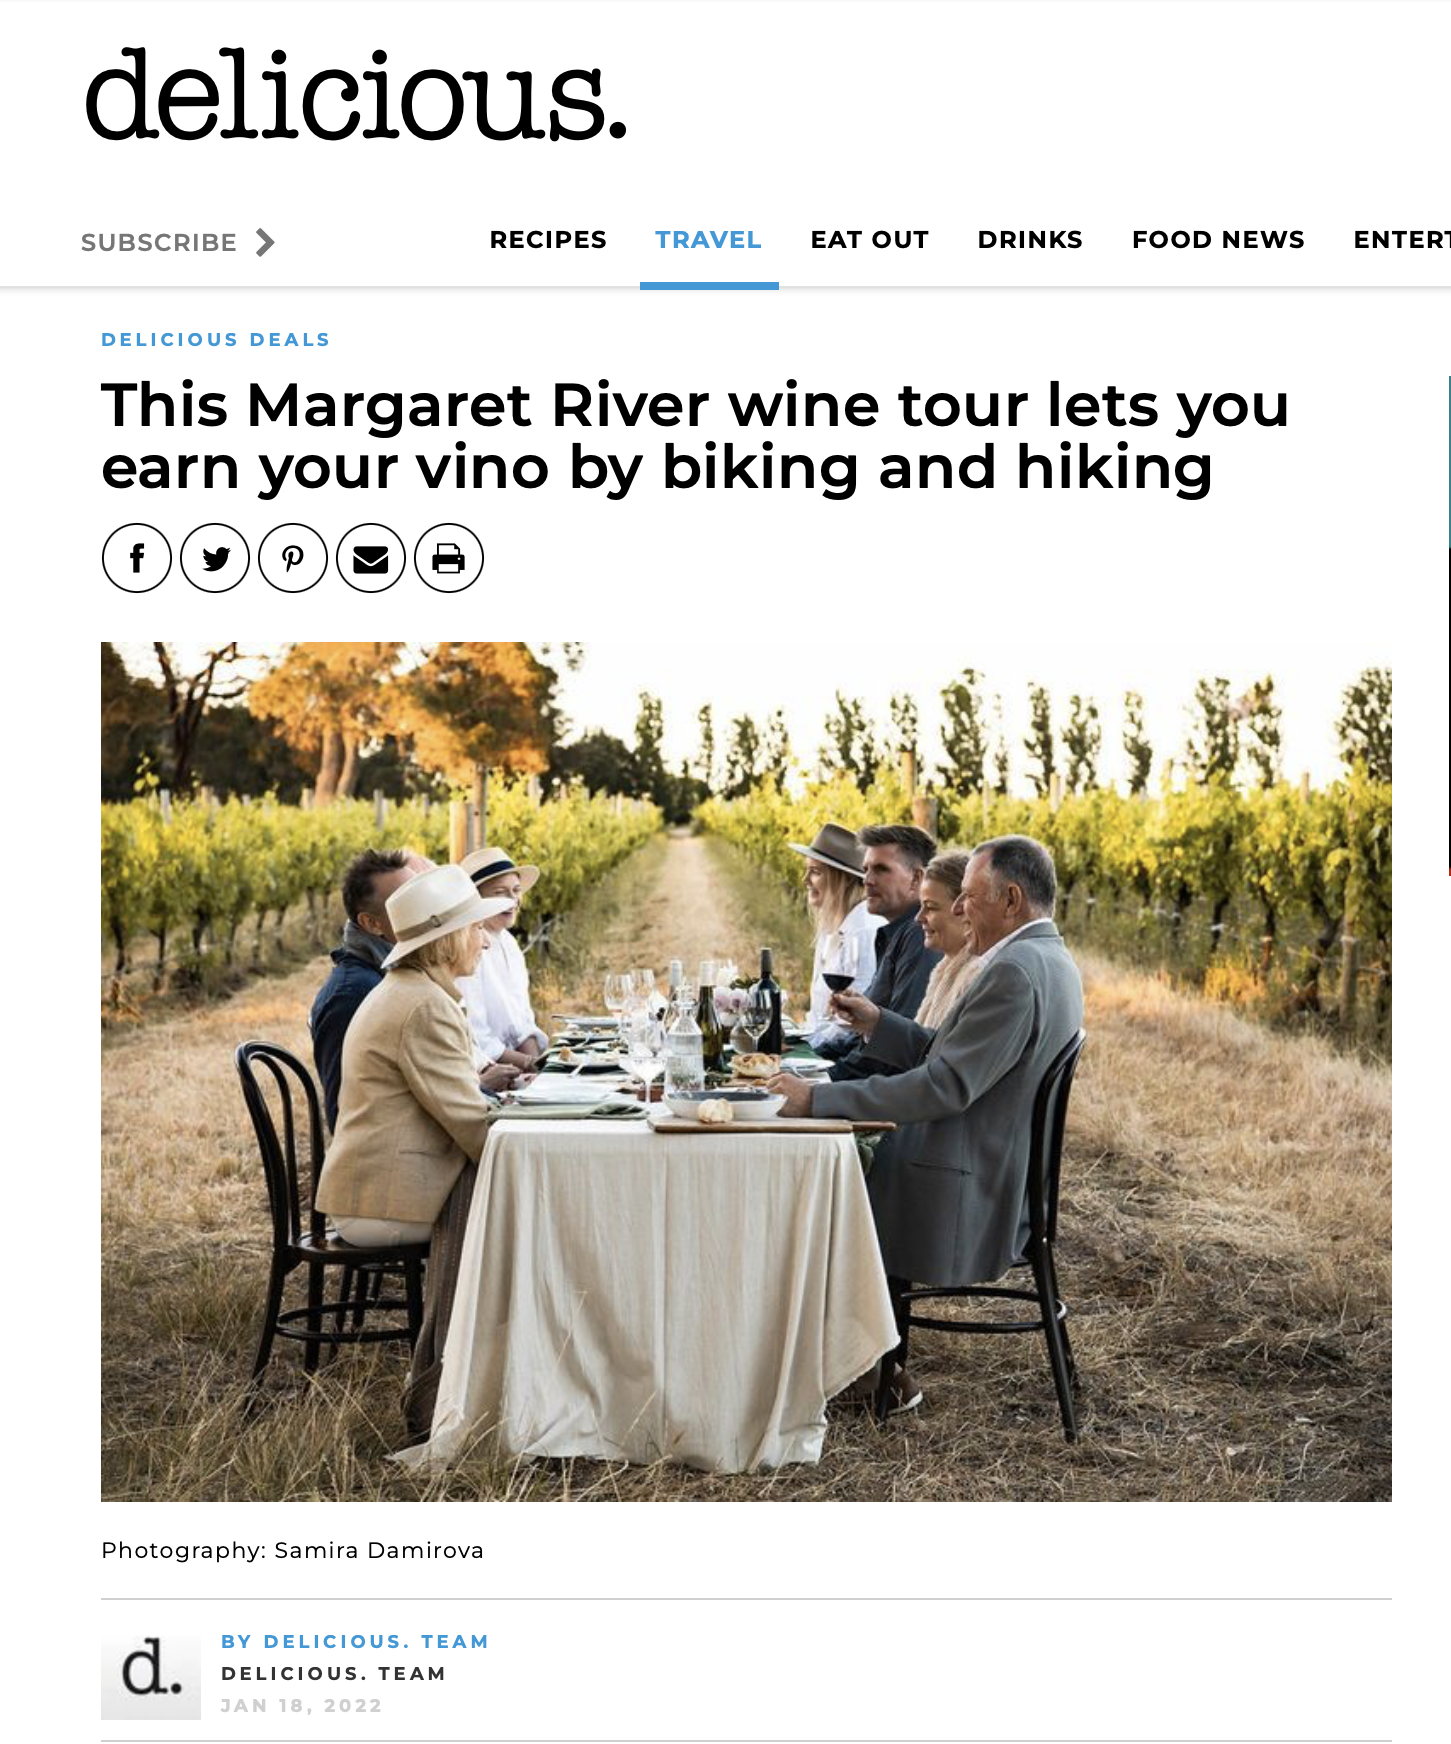 delicious. - This Margaret River wine tour lets you earn your vino by biking and hiking